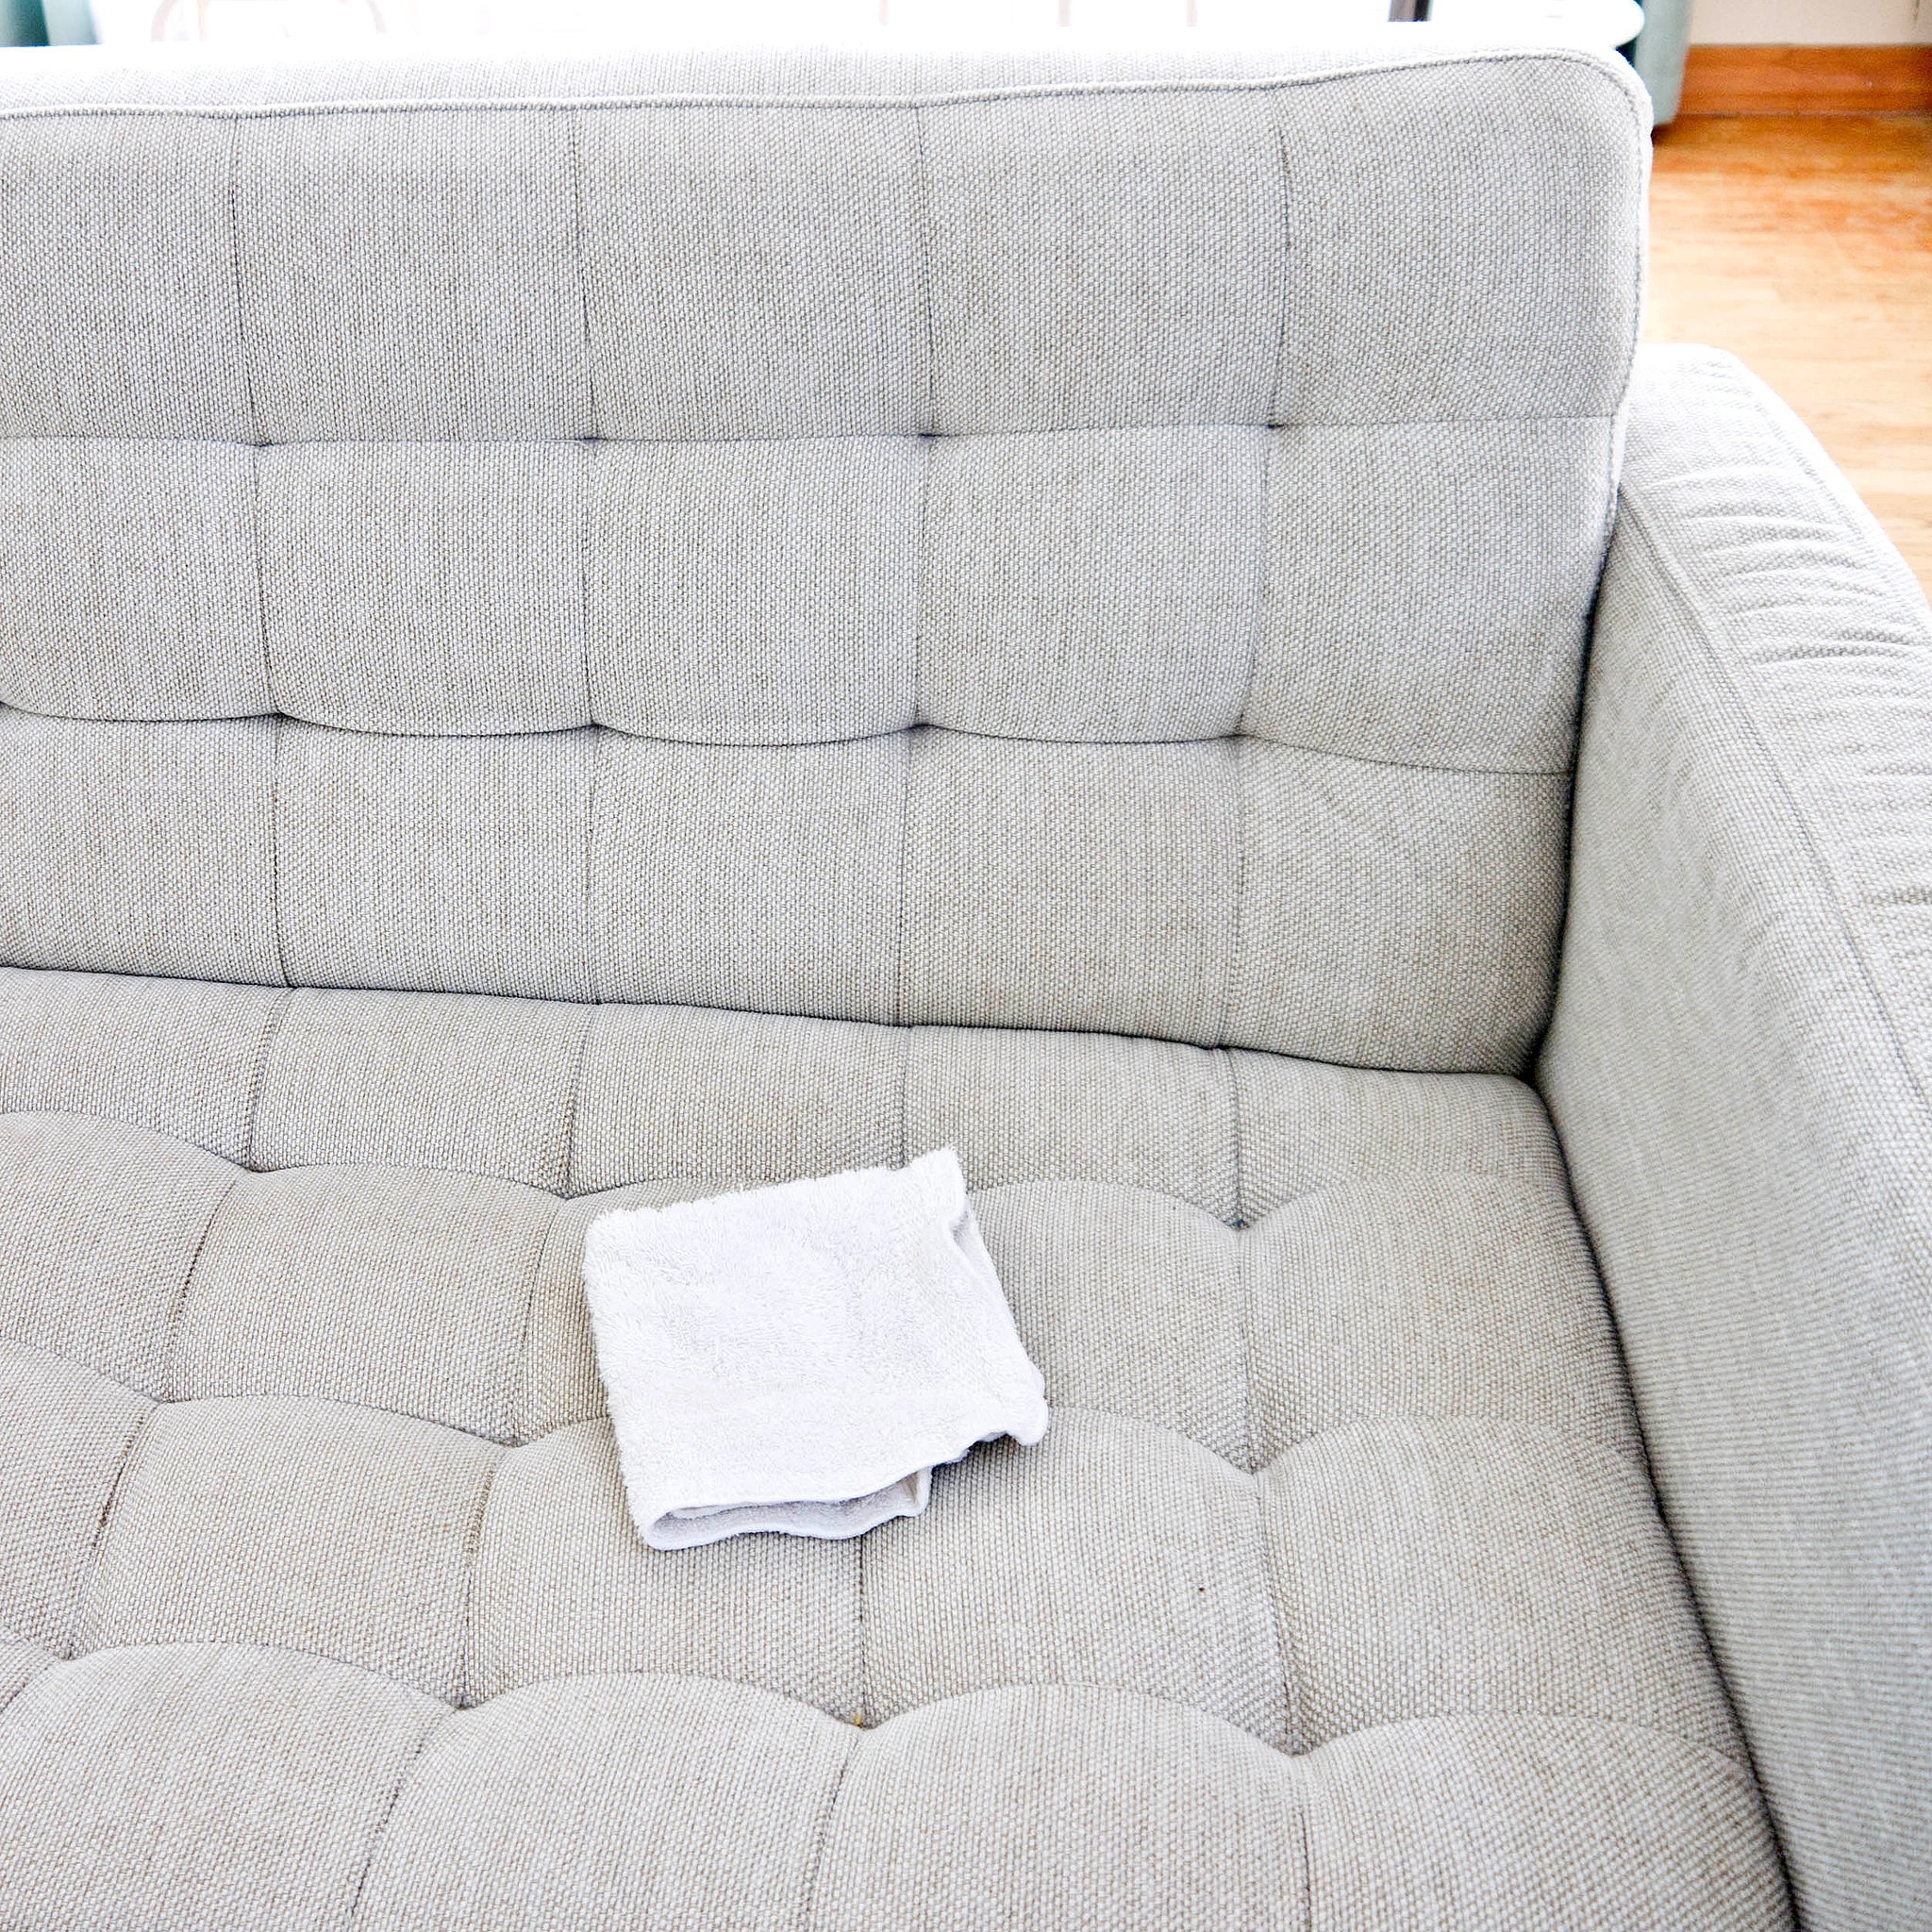 How To Clean A Natural Fabric Couch